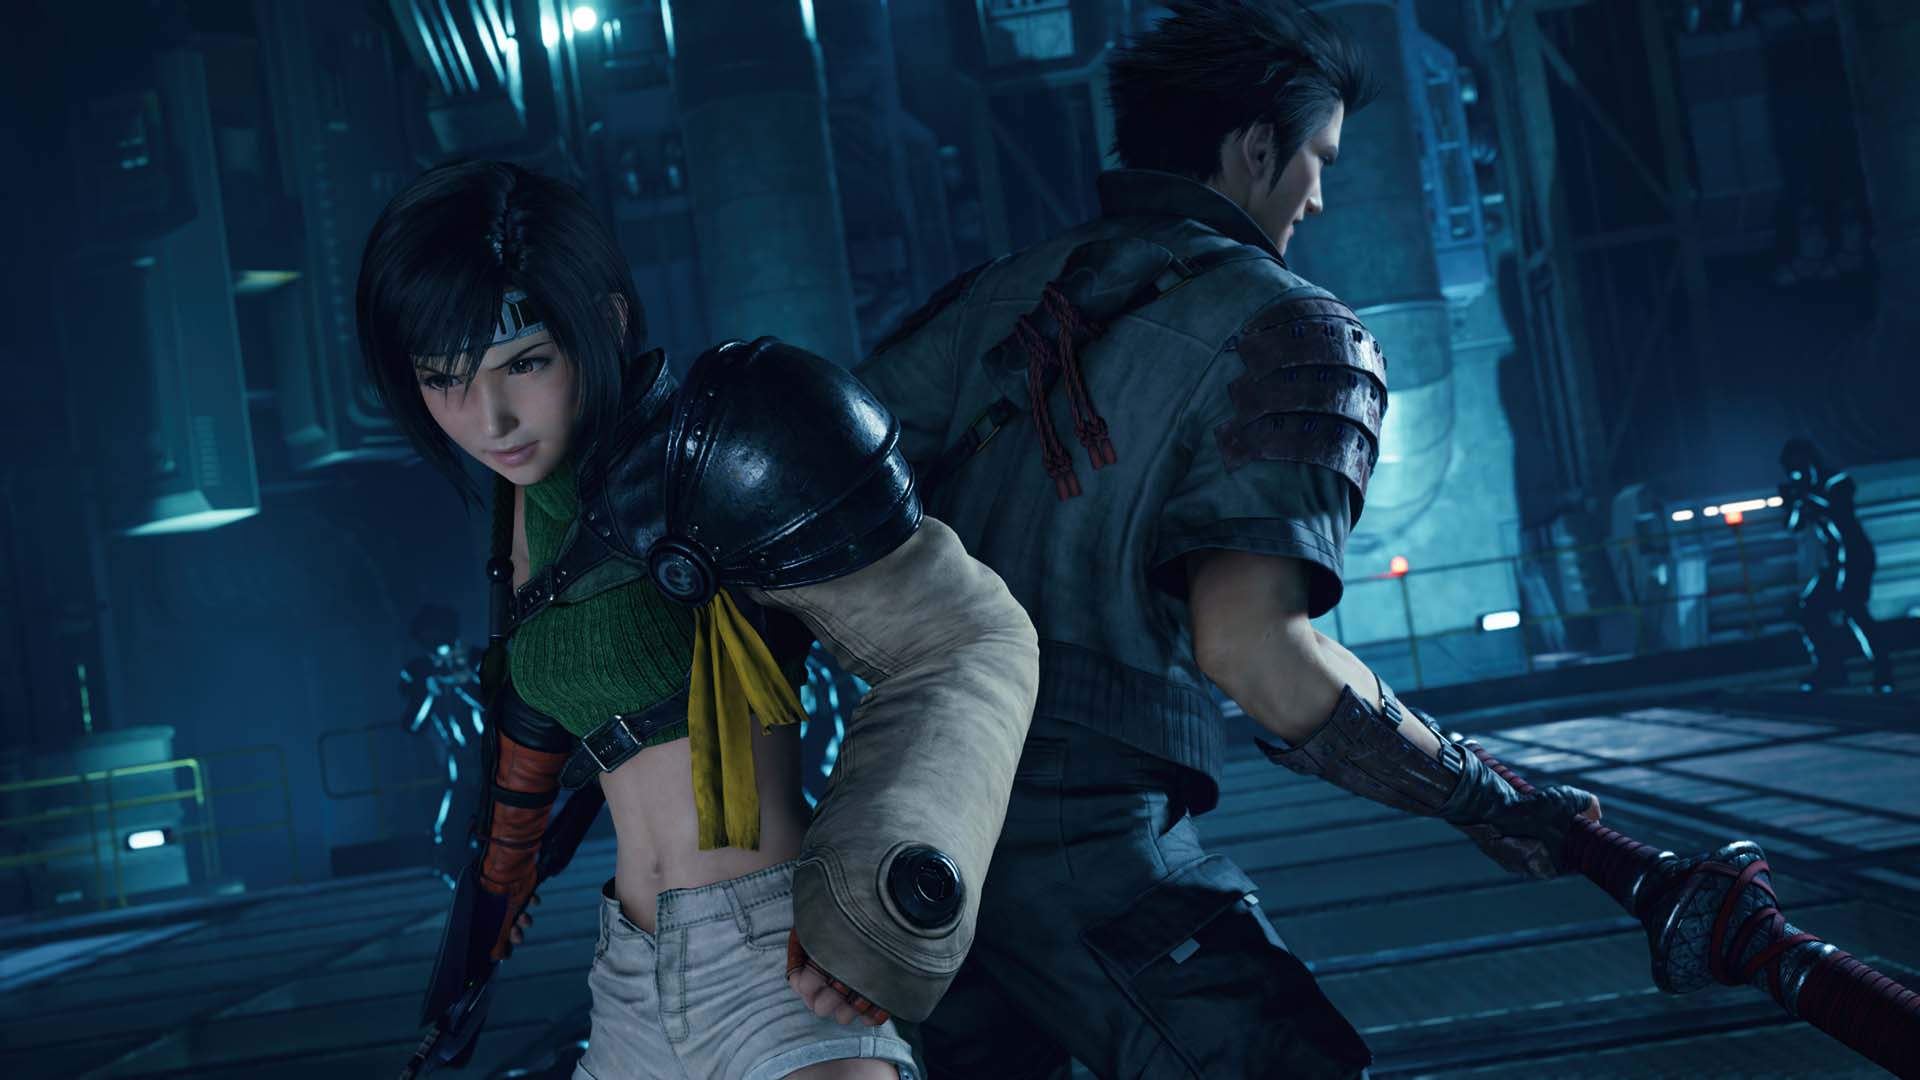 (11.29$) Final Fantasy VII Remake - EPISODE INTERmission (New Story Content Featuring Yuffie) DLC EU PS5 CD Key